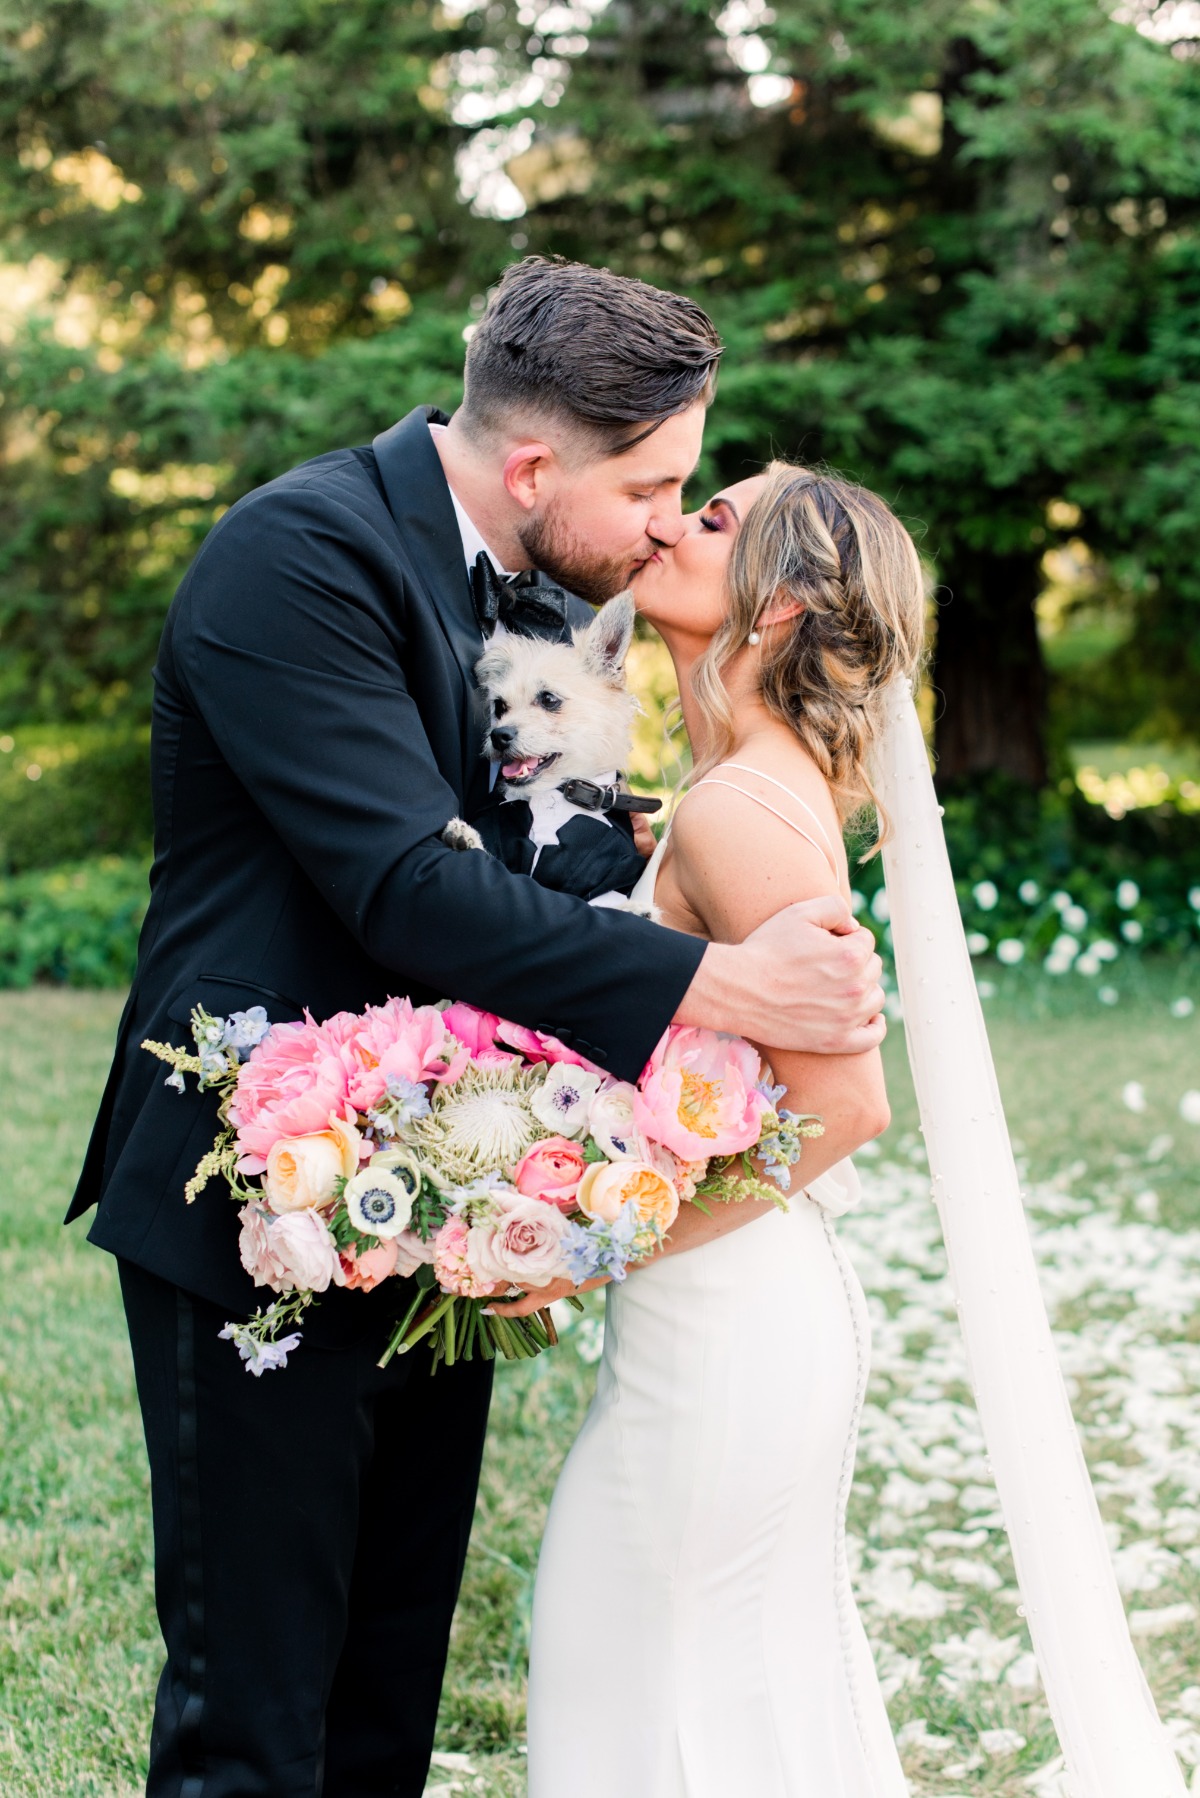 Puppy with newlyweds at pink wedding